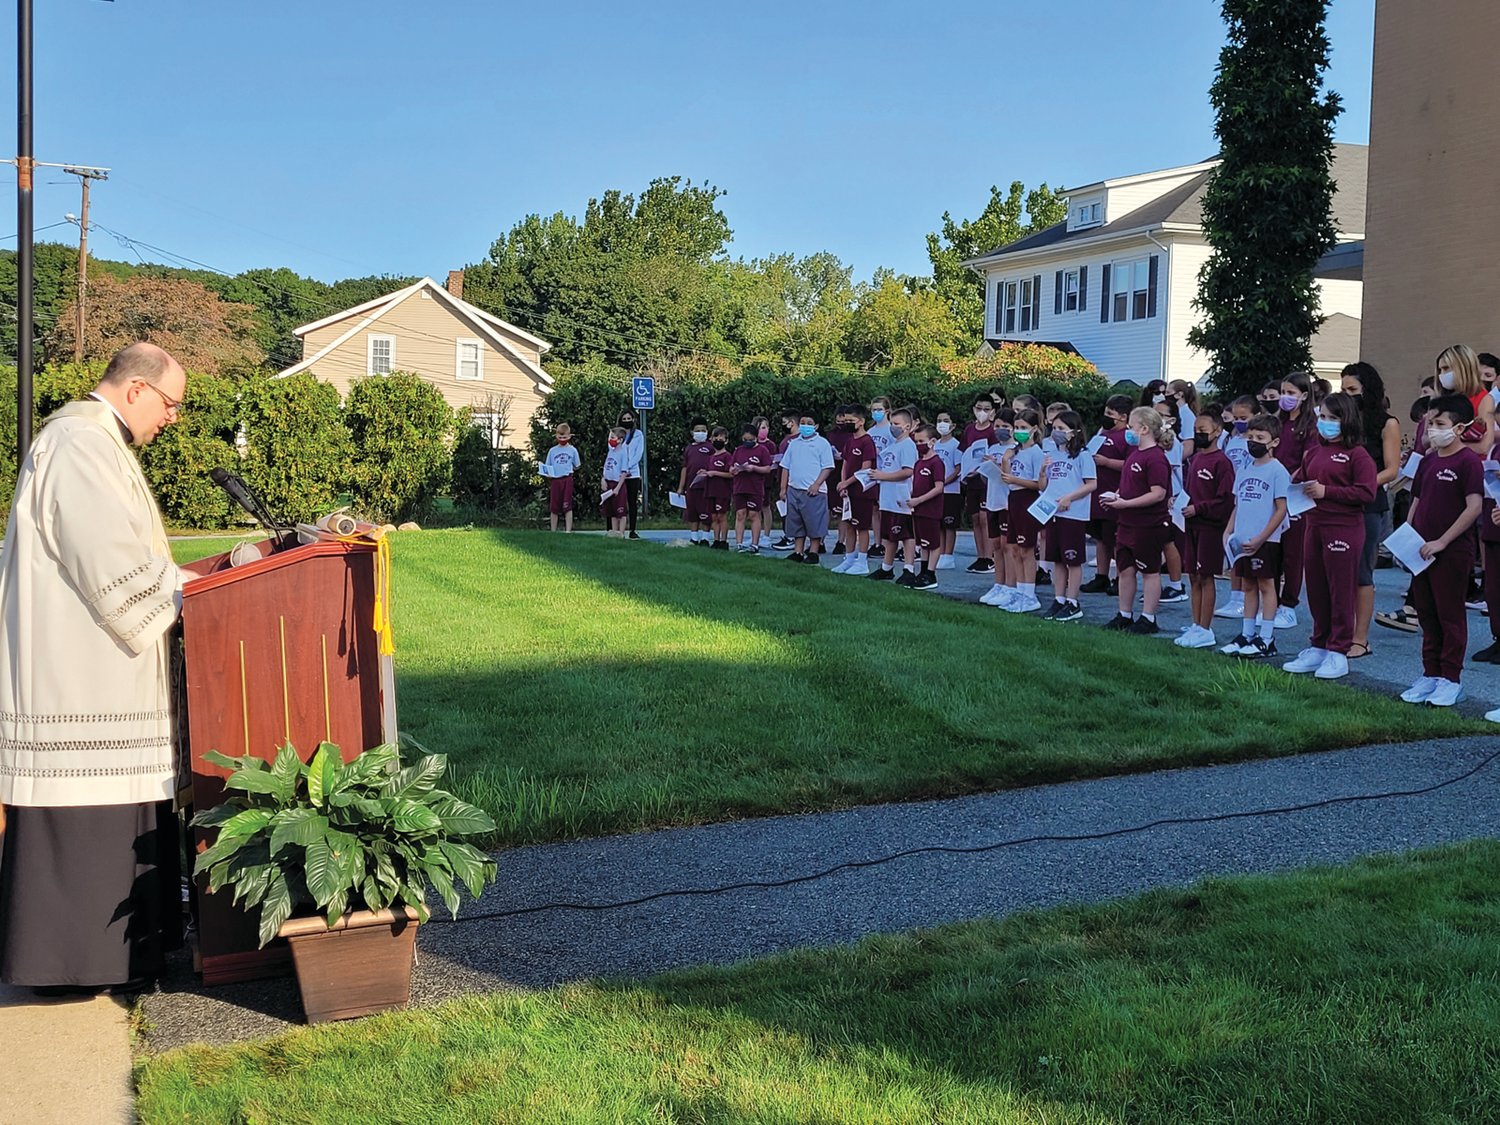 WORDS OF COMFORT: Rev. Angelo N. Carusi, pastor at St. Rocco’s, offered an opening prayer to begin the “Prayer for Peace and Healing on the 20th Anniversary of 9/11.”